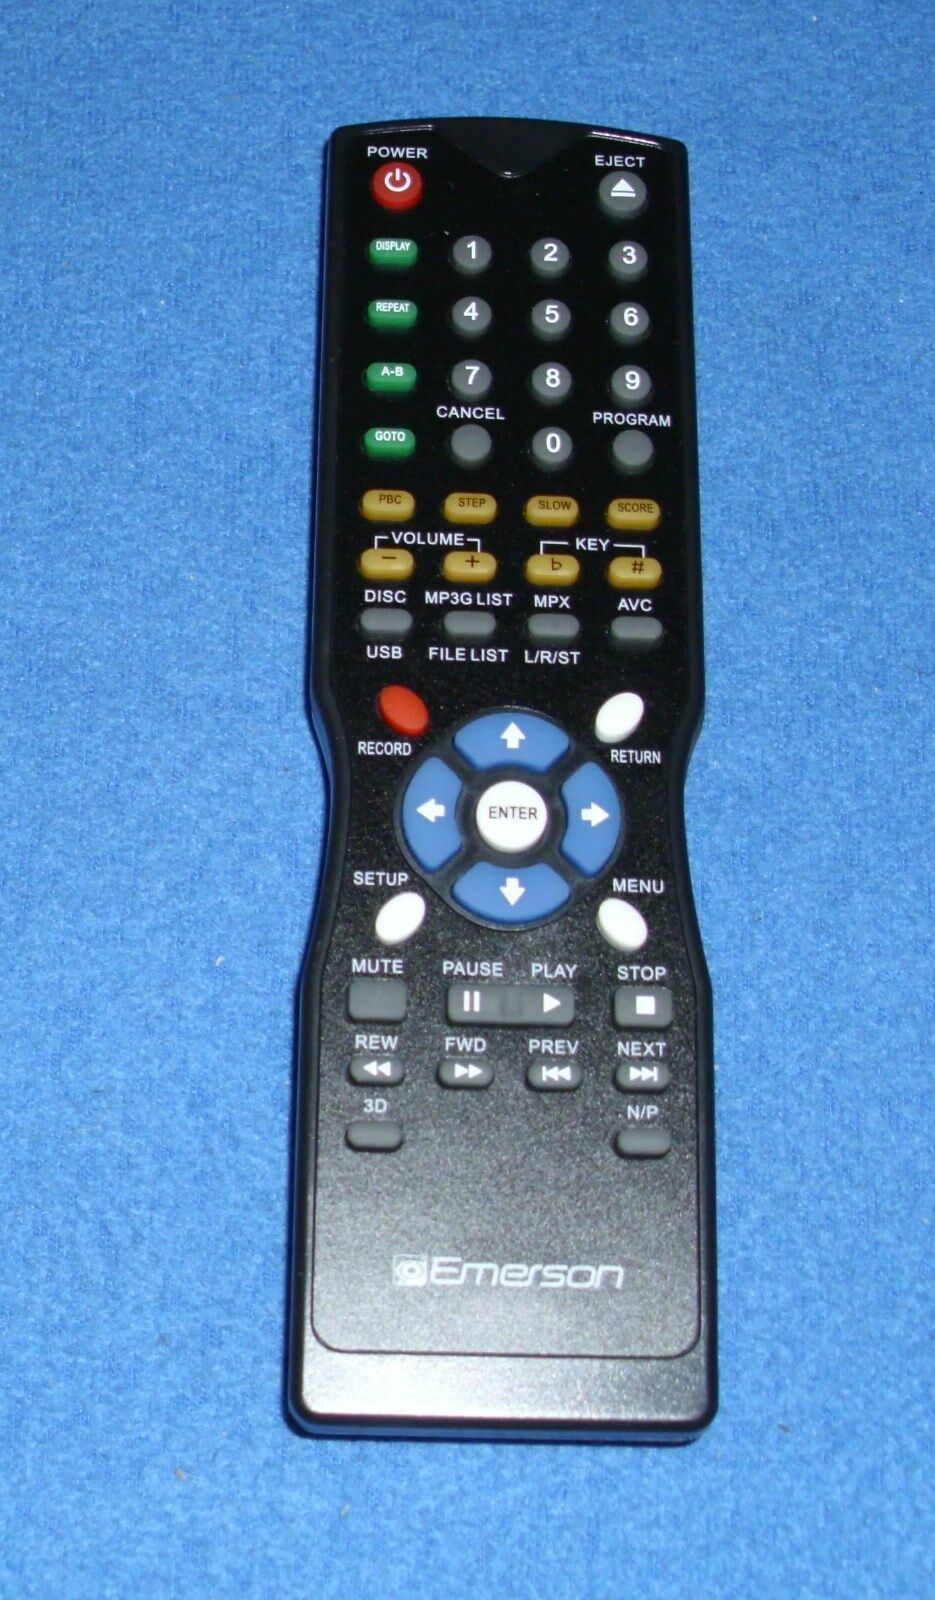 Remote Control For Emerson Karaoke Dvd Player ~ Dv120 ~ New In Oem Wrapper